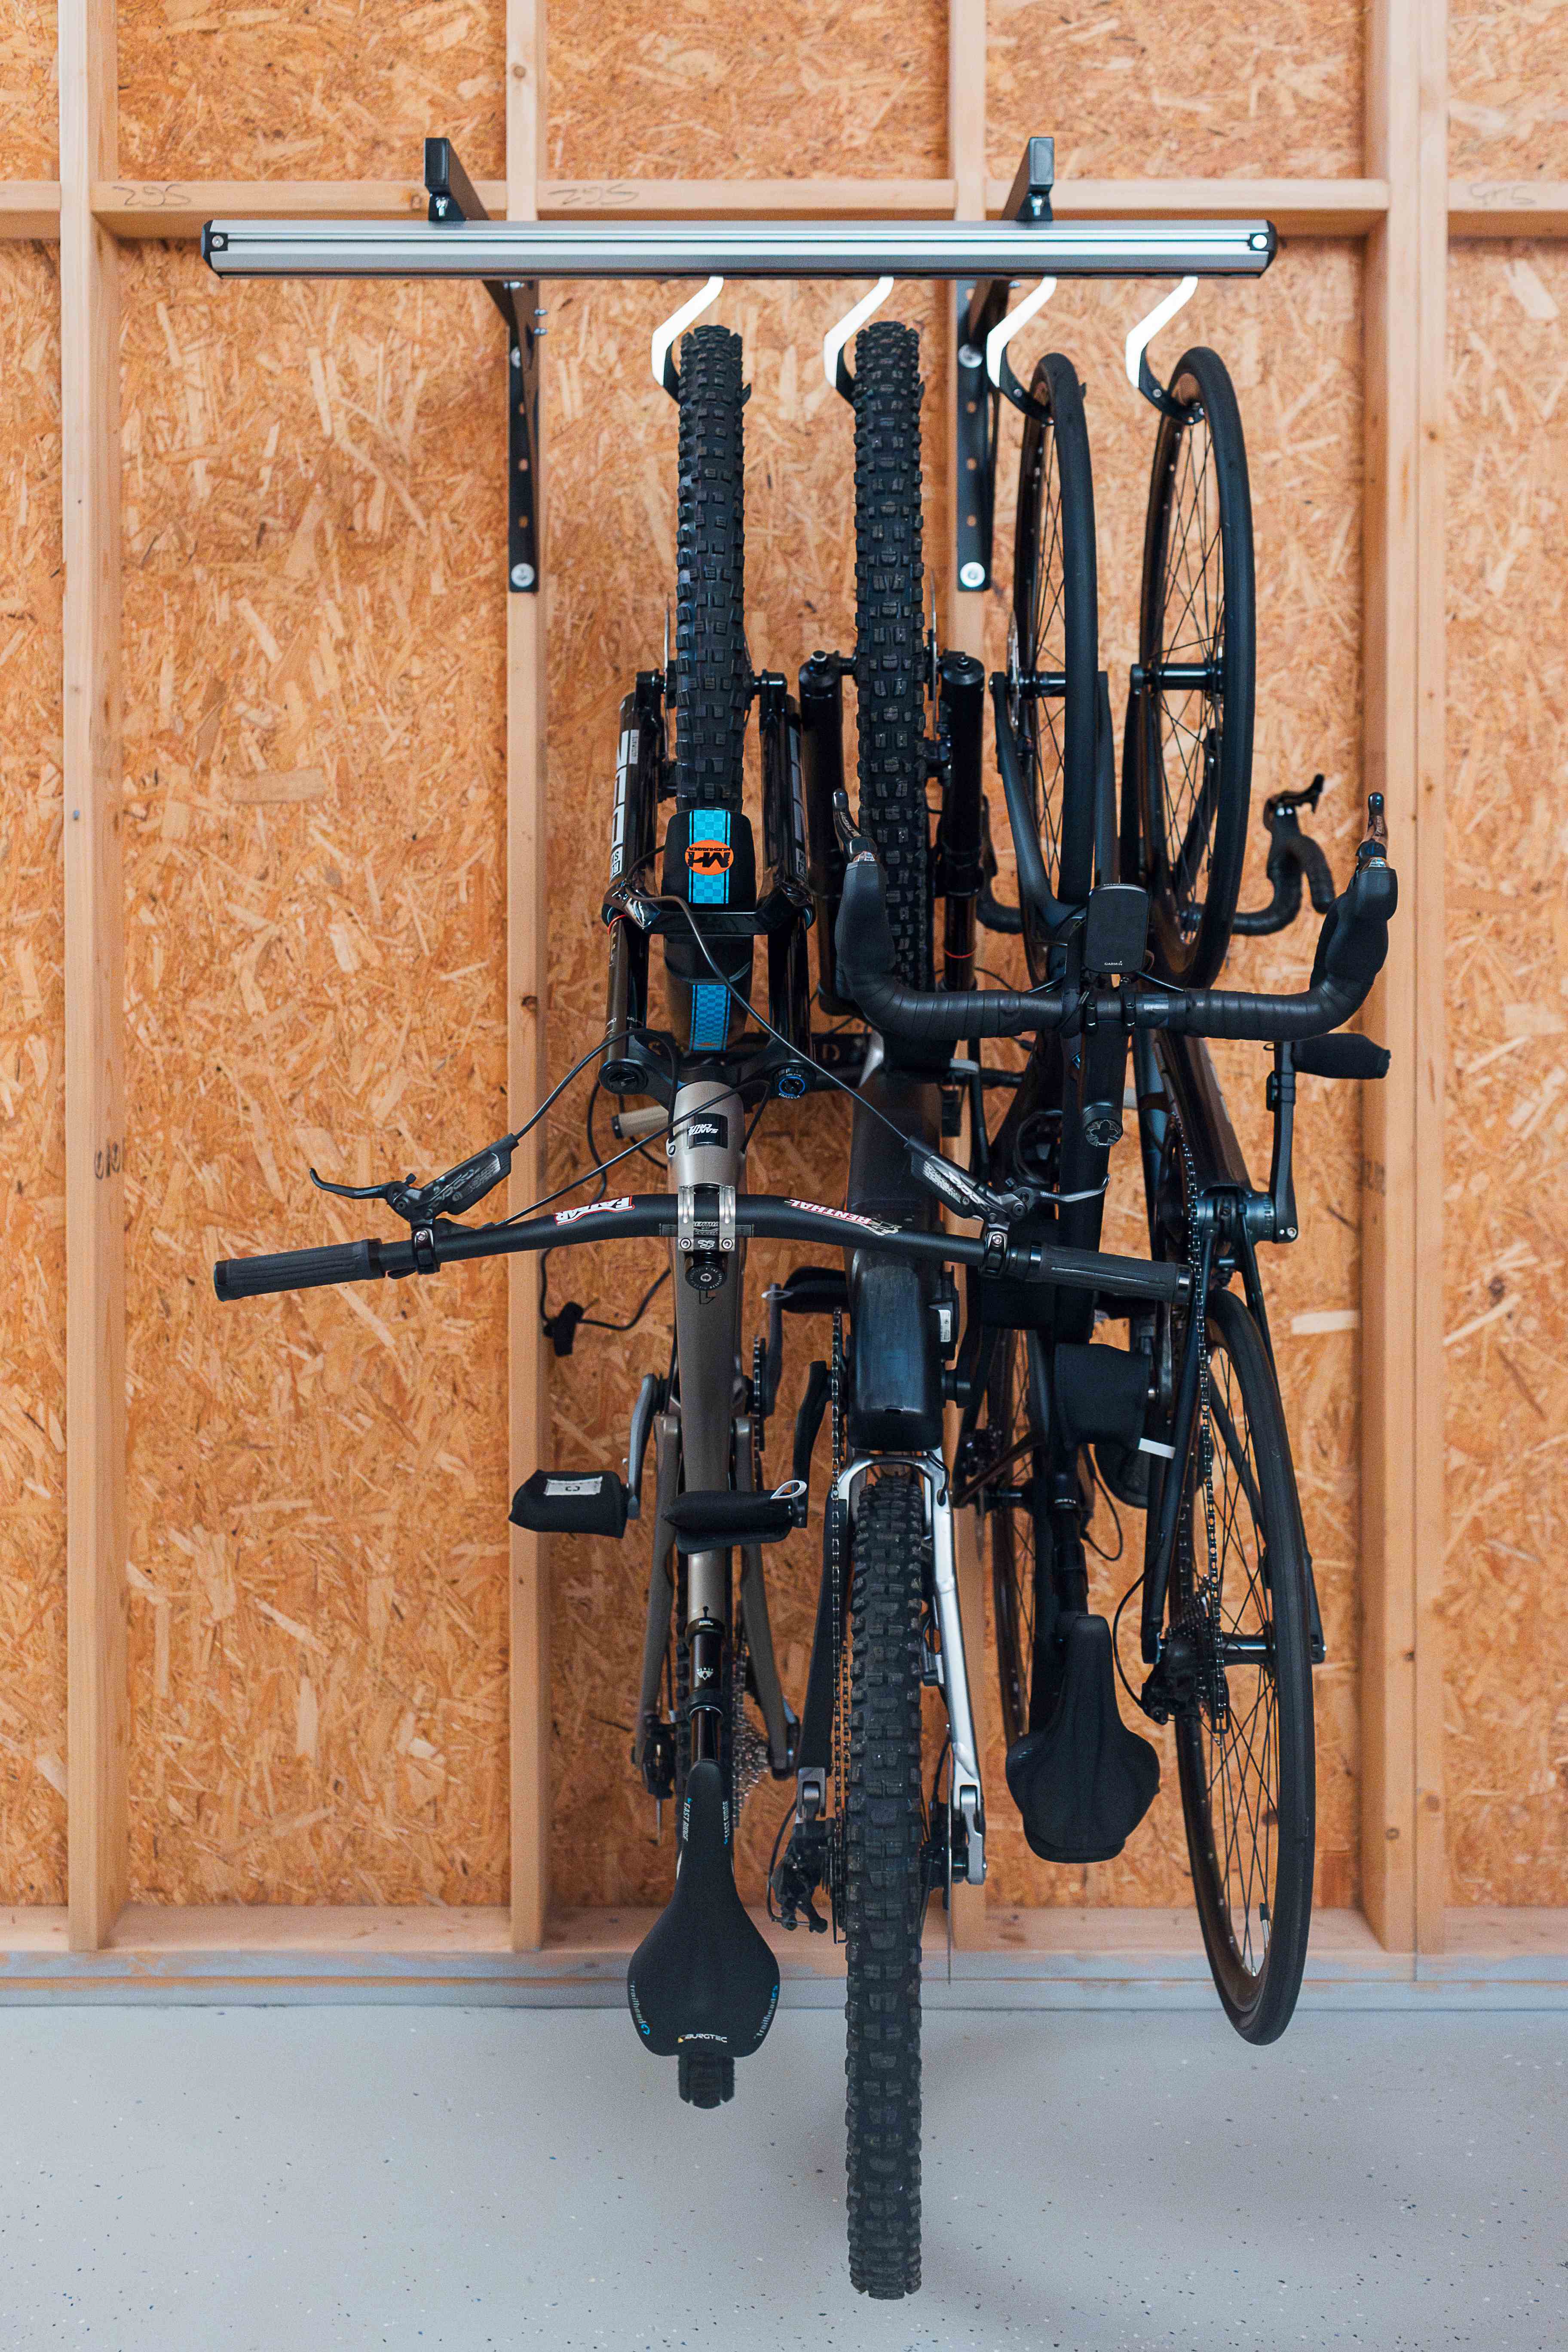 Easy to set up and use bicycle storage with the SpaceRail Storage System